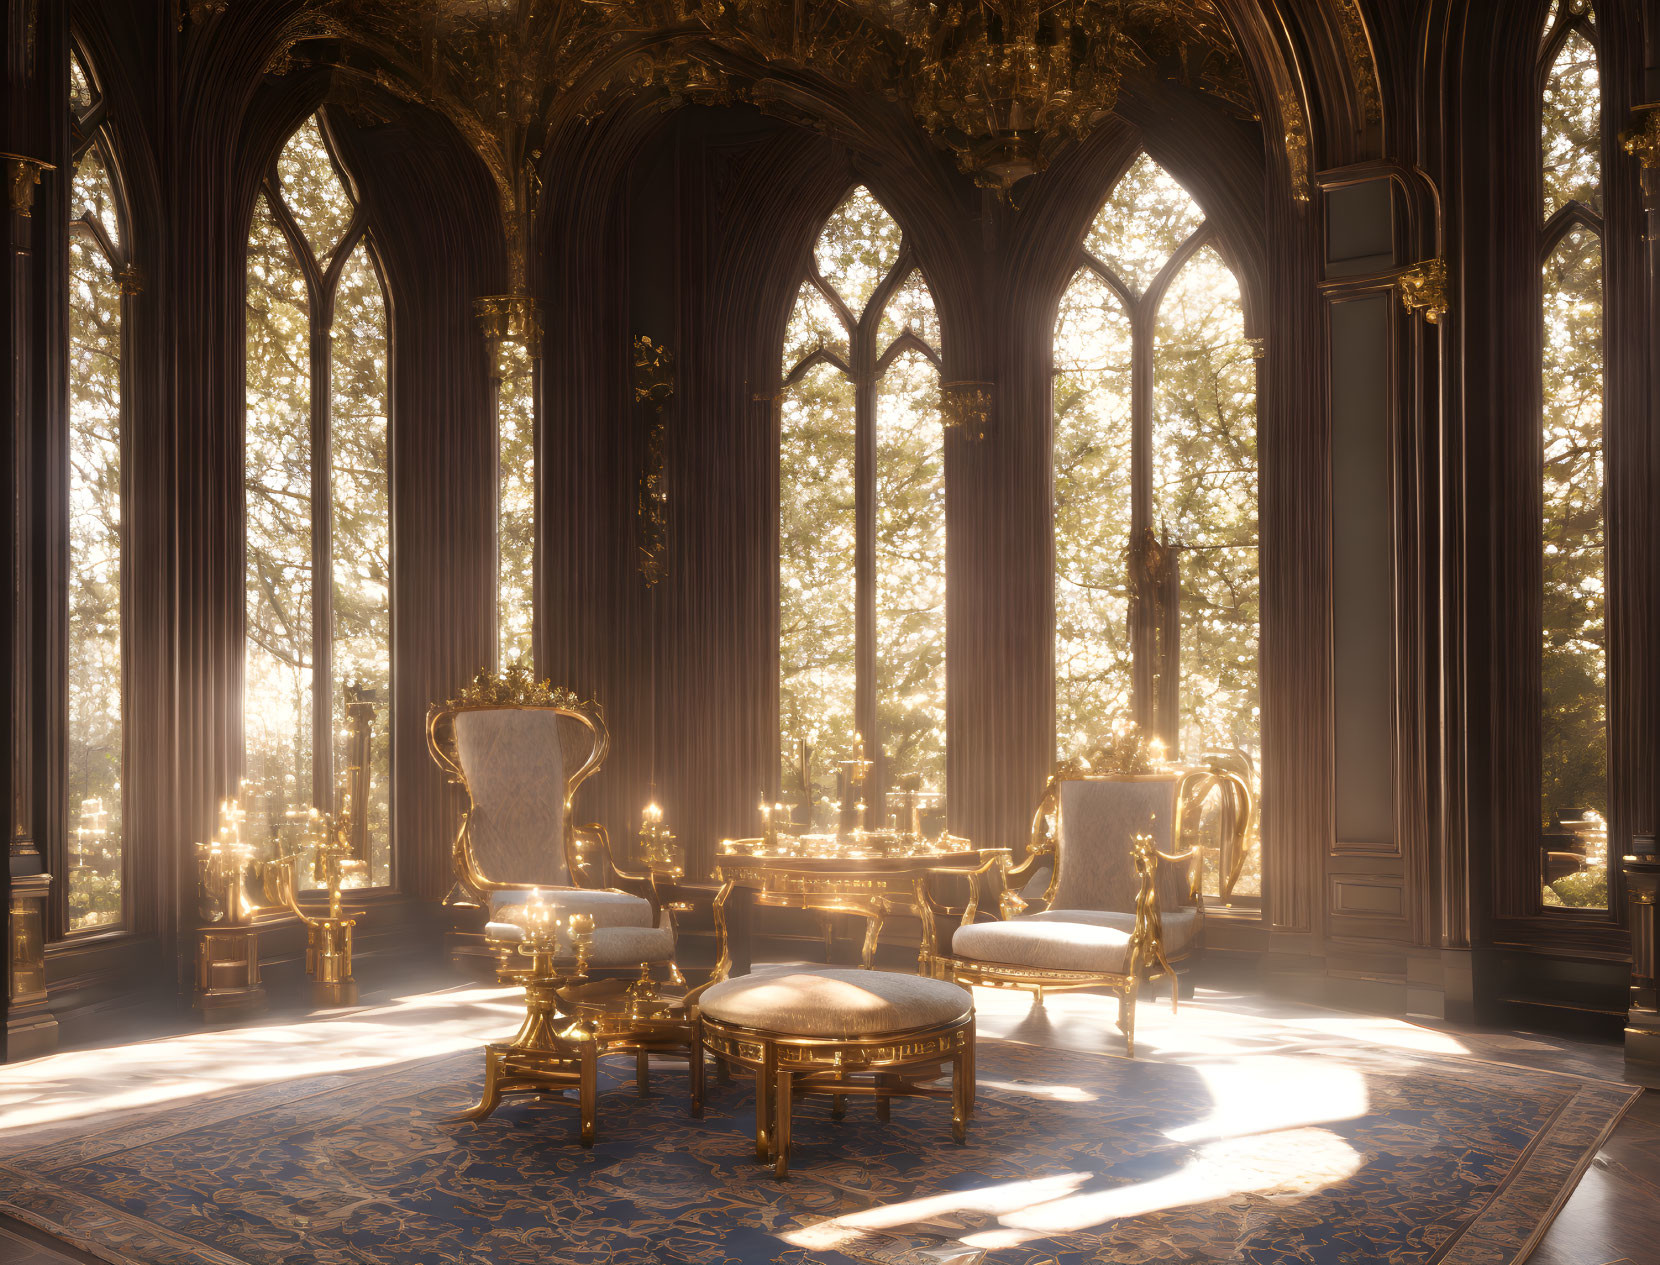 Luxurious Sunlit Gothic Room with Ornate Decorations